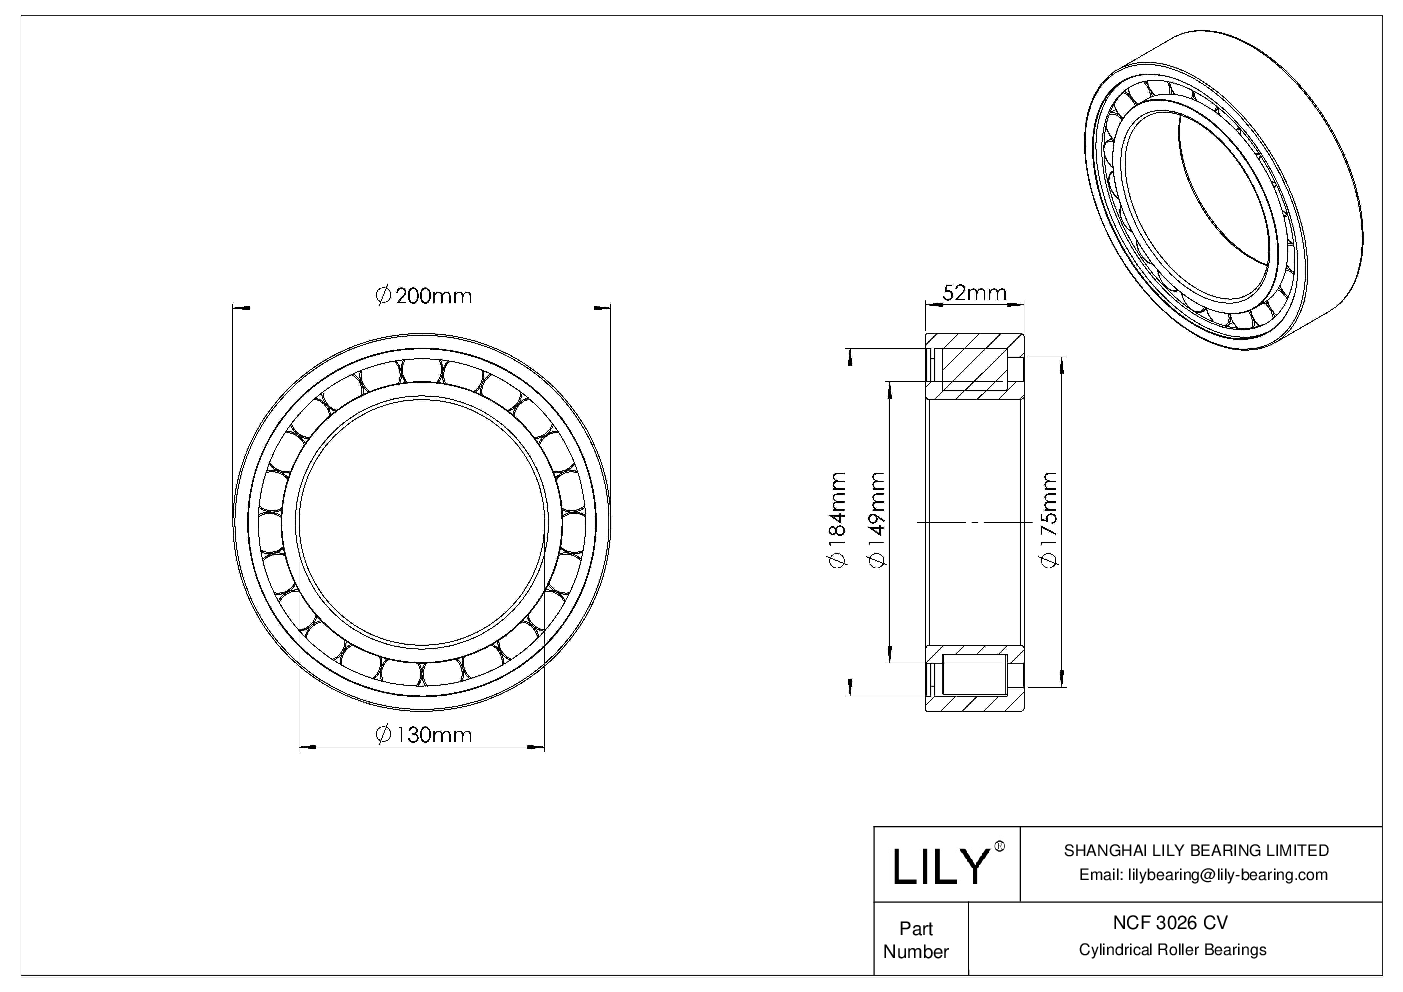 NCF 3026 CV Single Row Full Complement Cylindrical Roller Bearings cad drawing